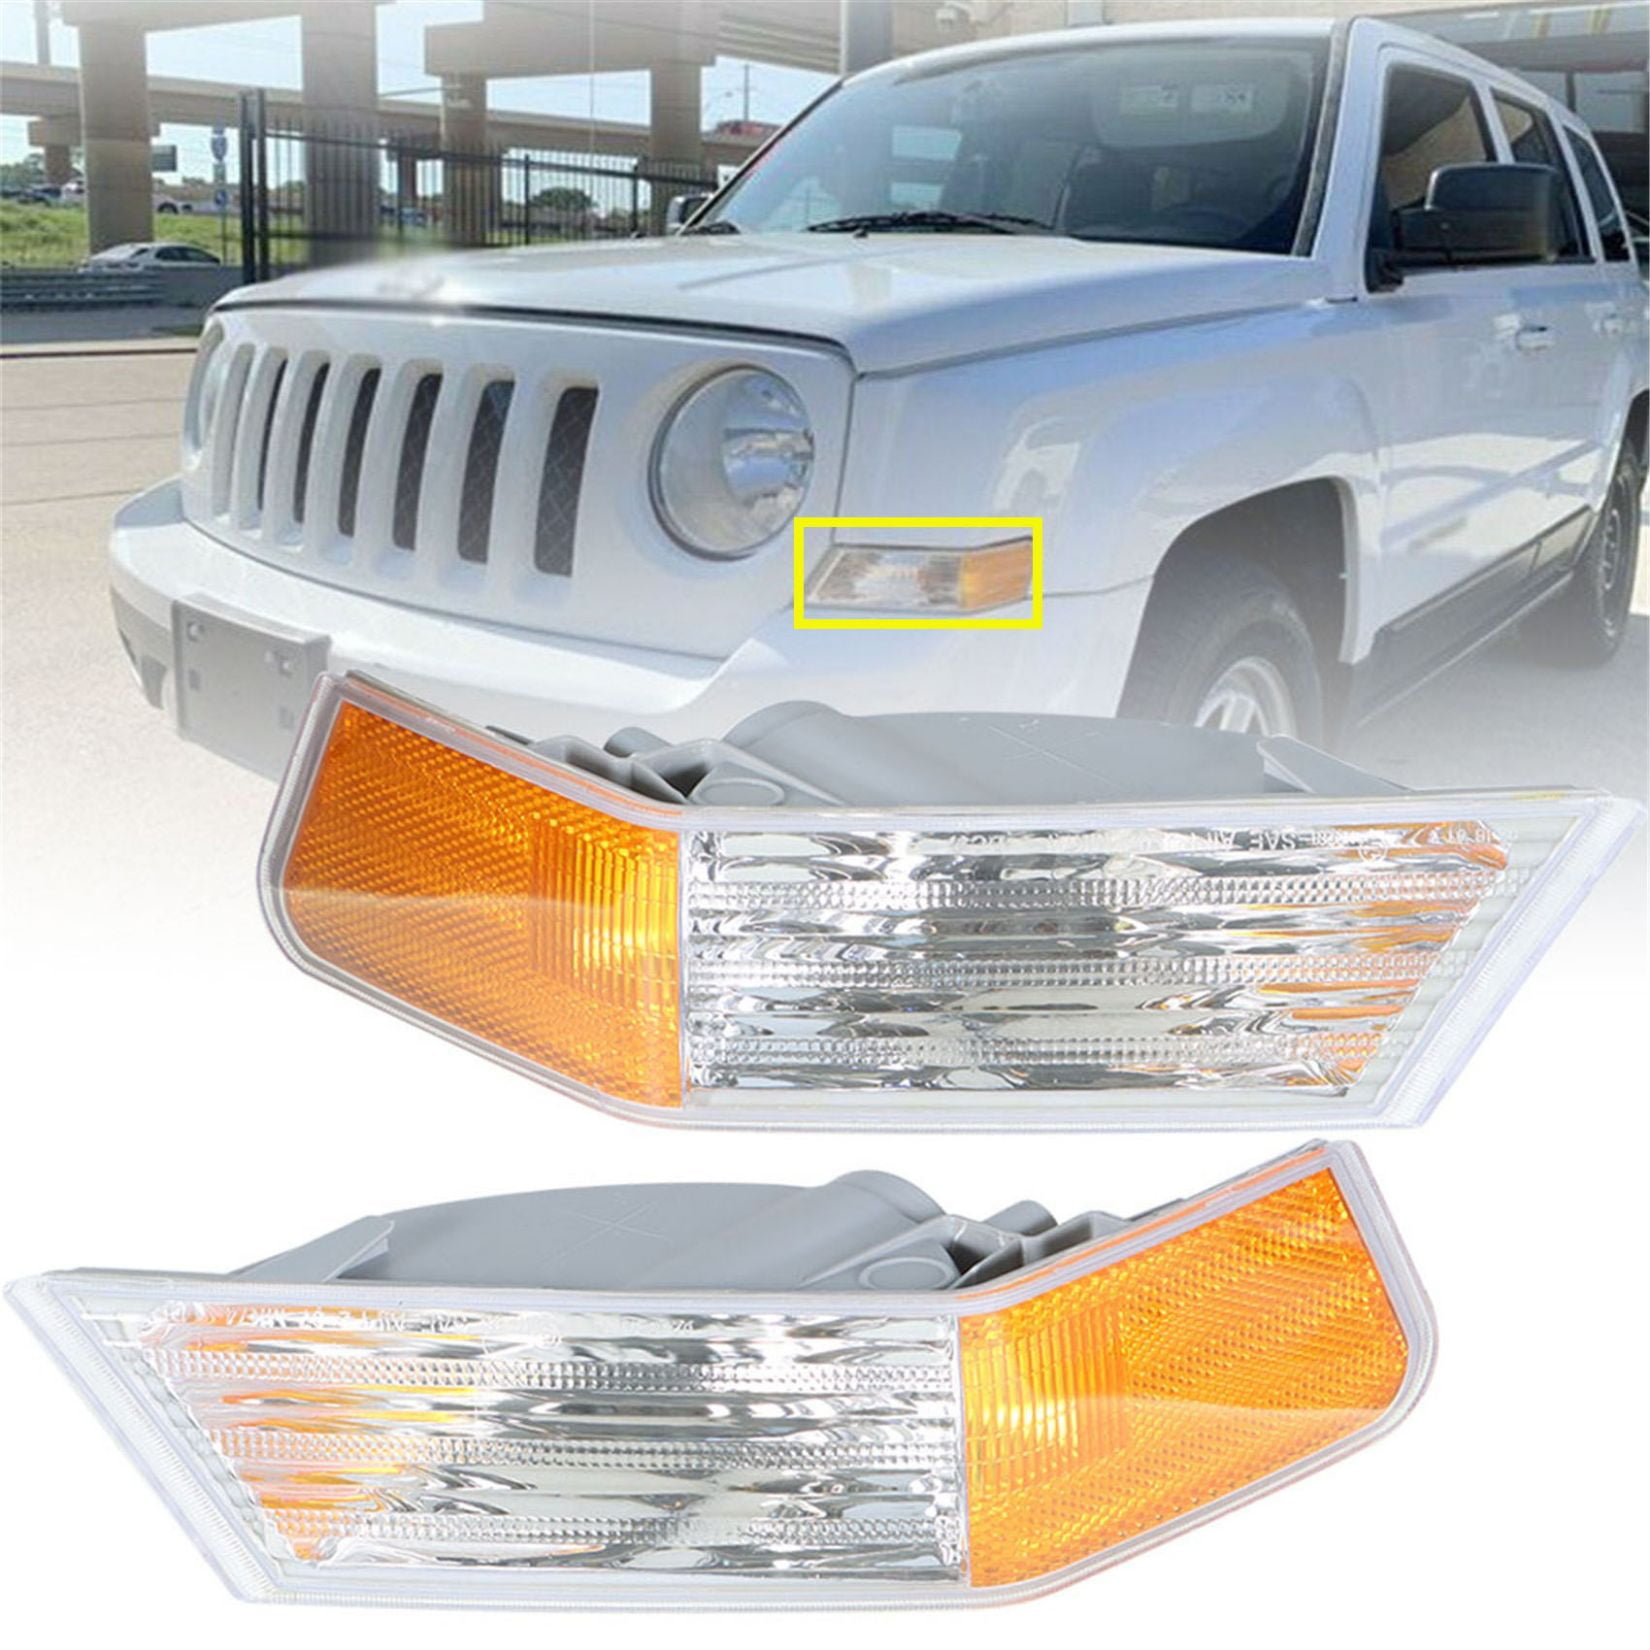 For Jeep Patriot Turn Signal/Parking Light Assembly 2007-2014 Driver Side w/Bulbs DOT Certified Replacement For CH2526102 CarLights360 